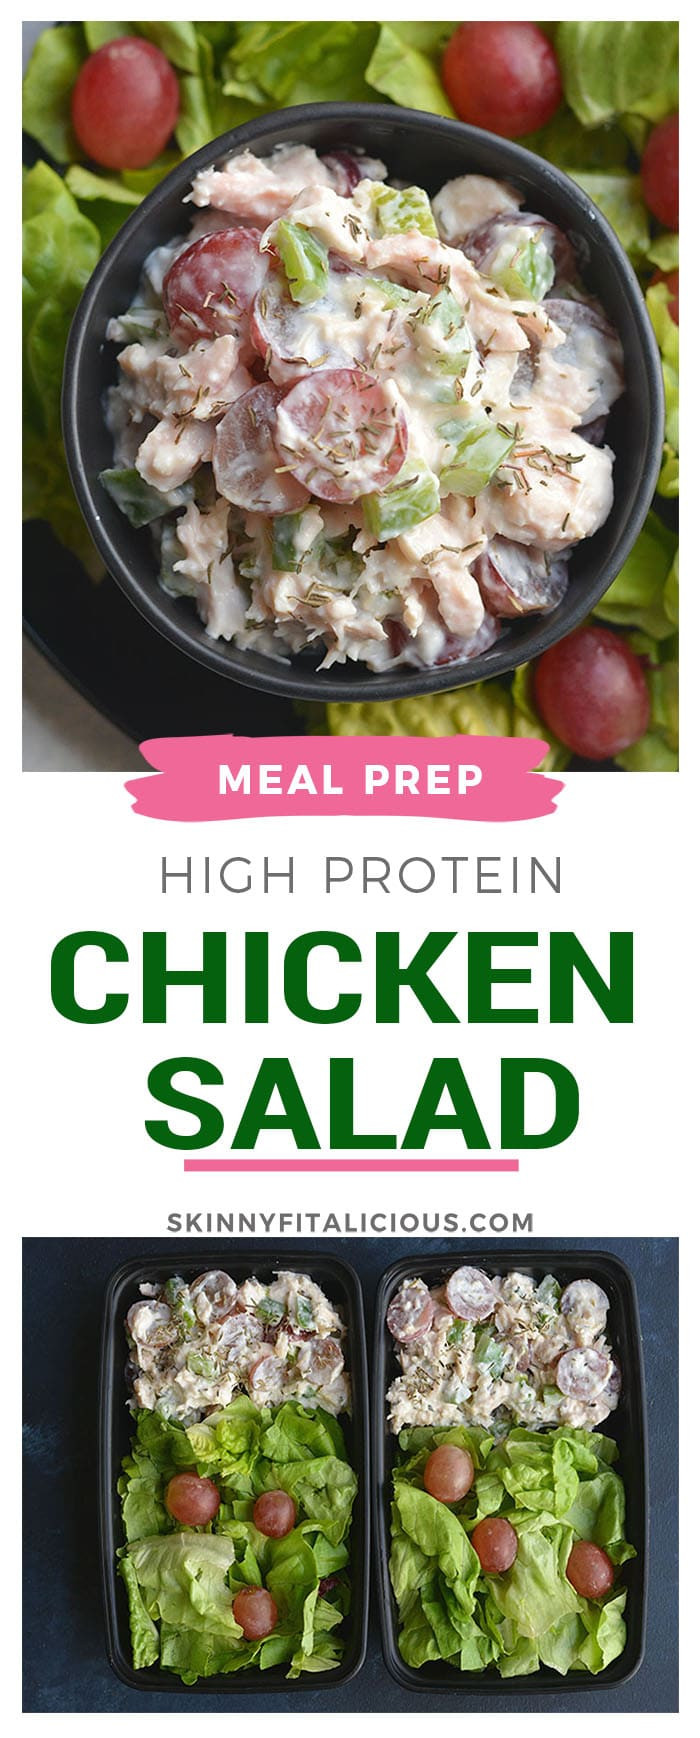 Low Calorie Meal Prep Recipes
 Meal Prep High Protein Chicken Salad GF Low Cal